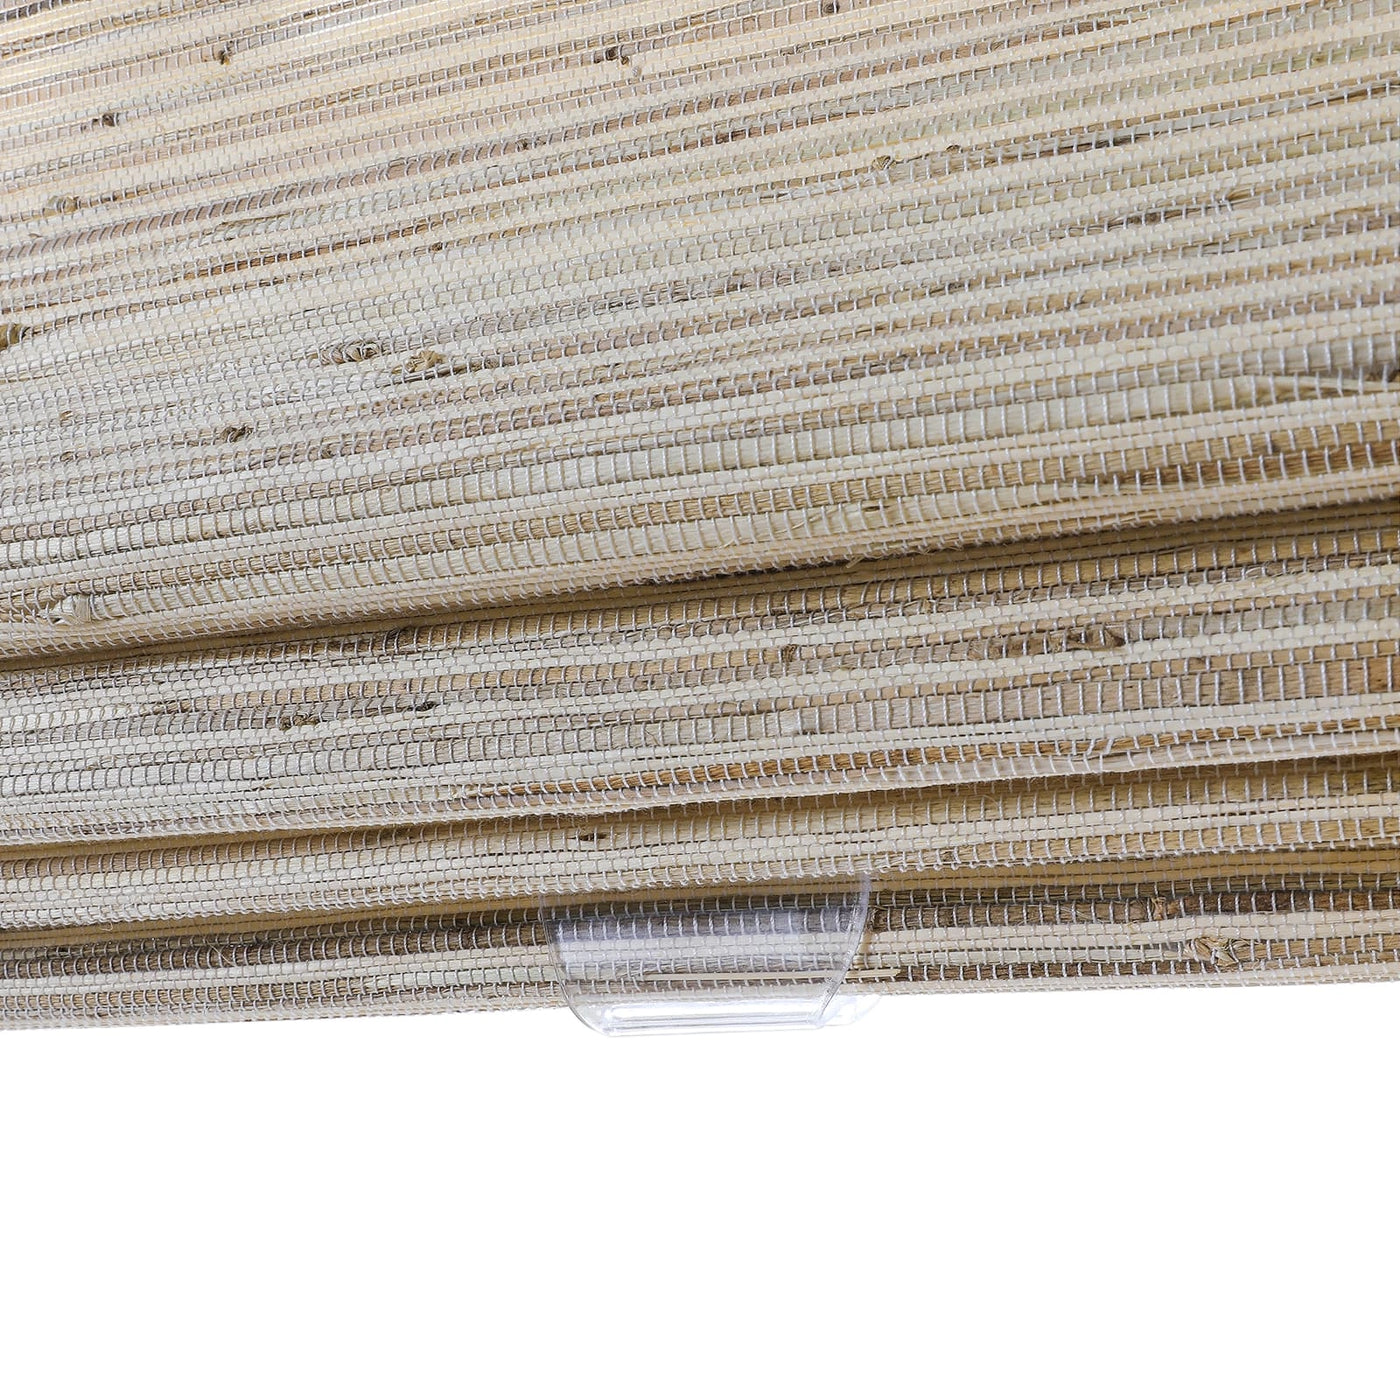 Natural Ramie Bamboo Woven Shade - Beige Brown